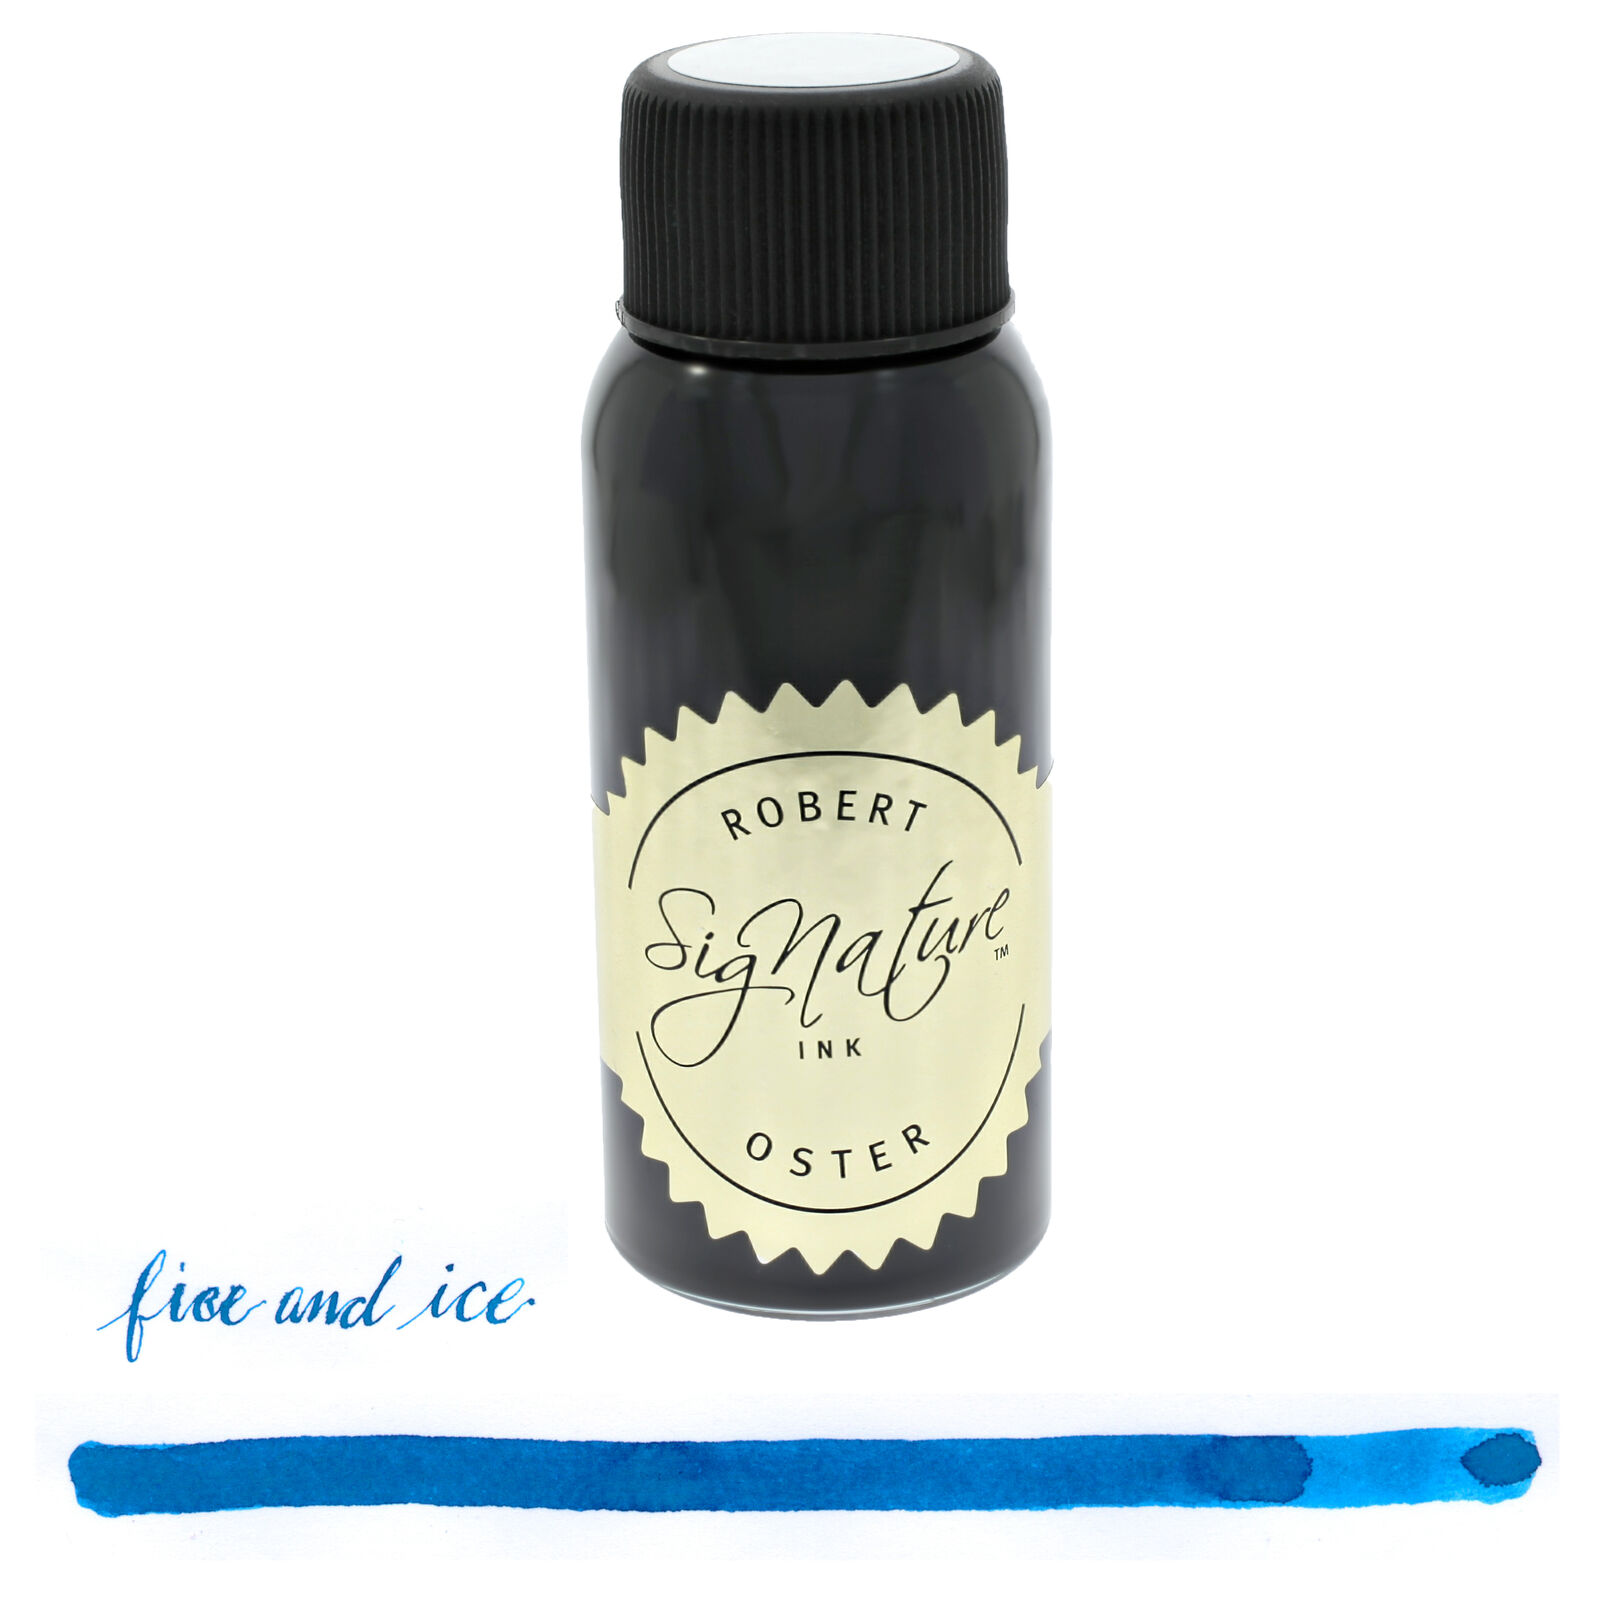 Robert Oster Signature Fire and Ice Blue 50ml Bottled Ink for Fountain Pens